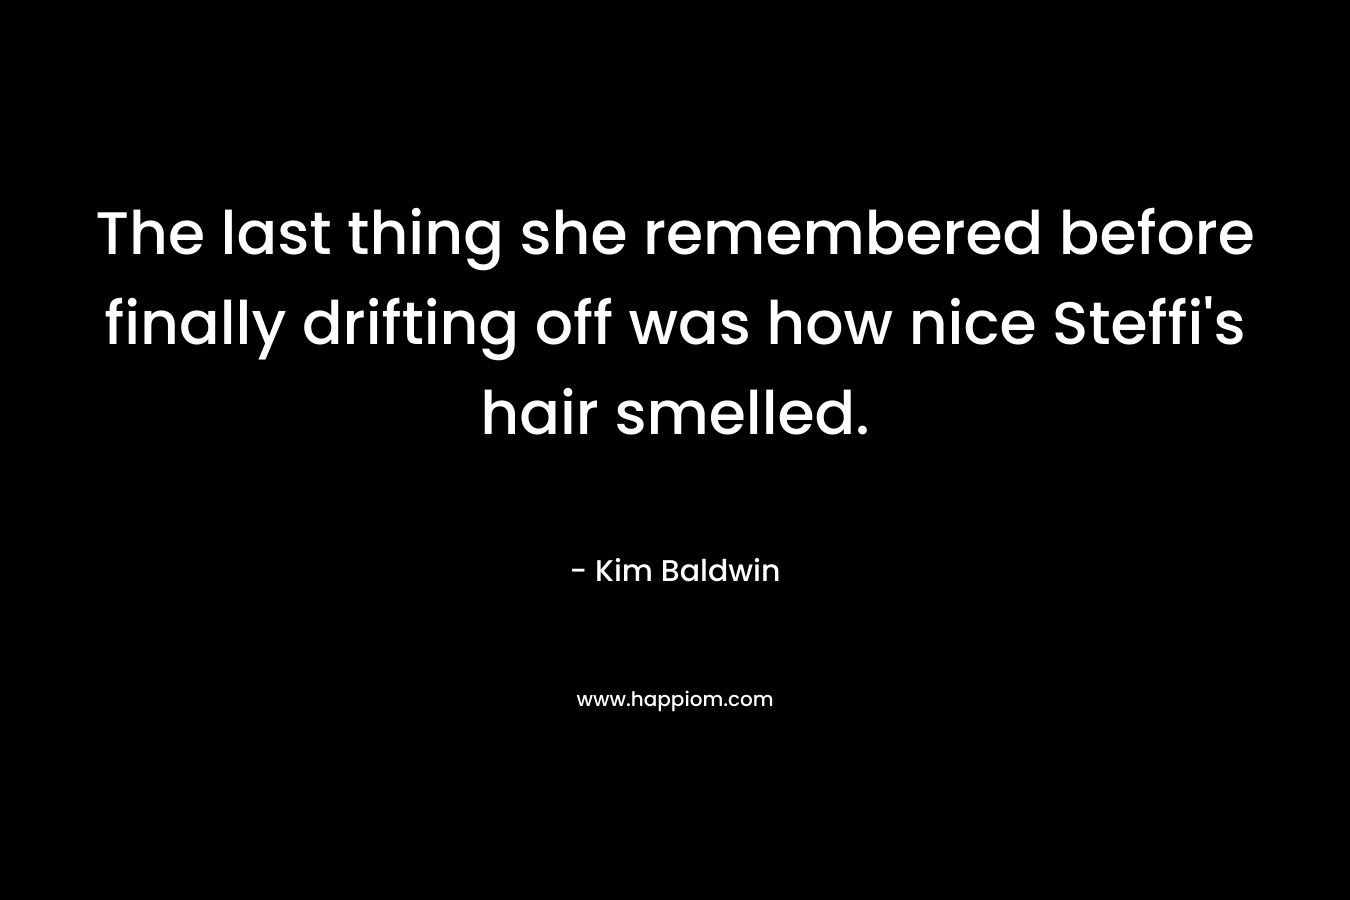 The last thing she remembered before finally drifting off was how nice Steffi's hair smelled.